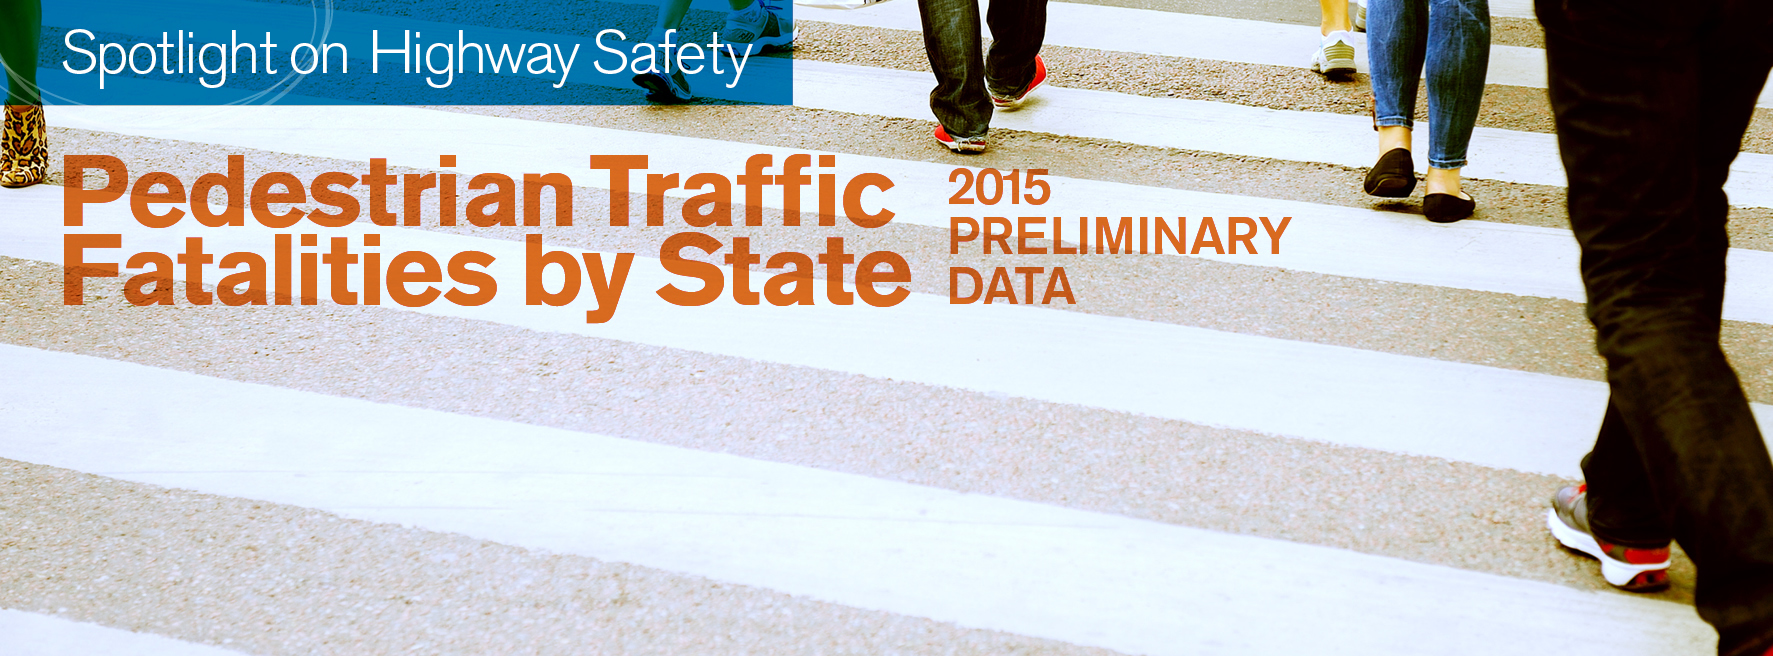 Pedestrian Traffic Fatalities by State: 2015 Preliminary Data